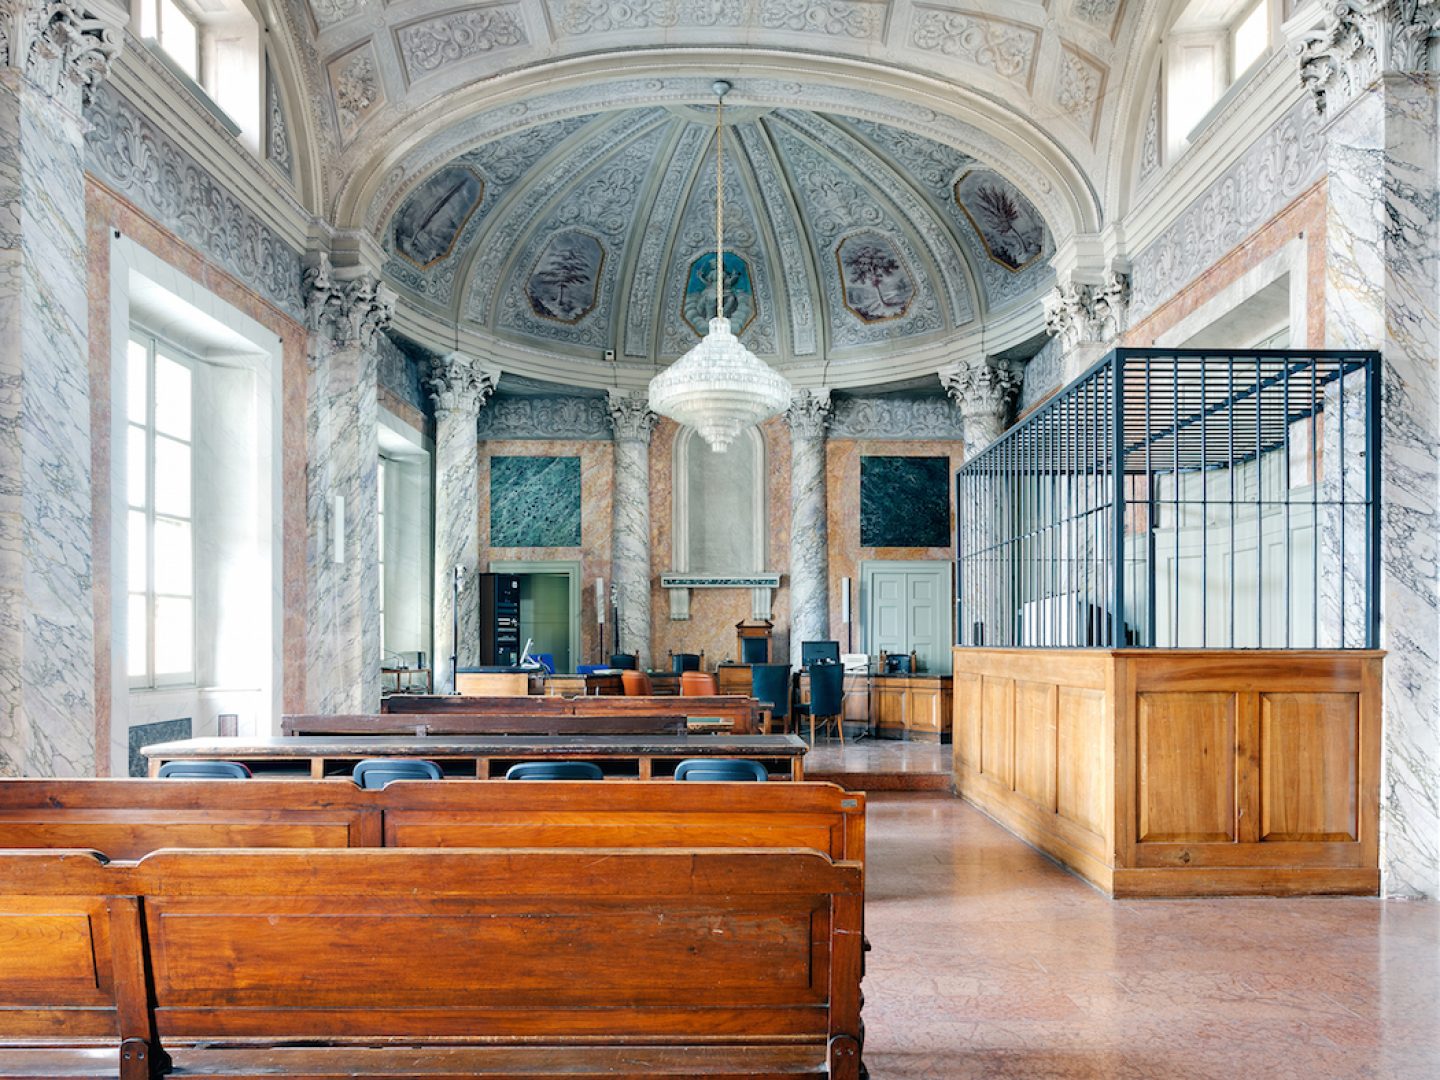 Luca Sironi_photography-_Fragments of justice_Luca Sironi_cremona_7570